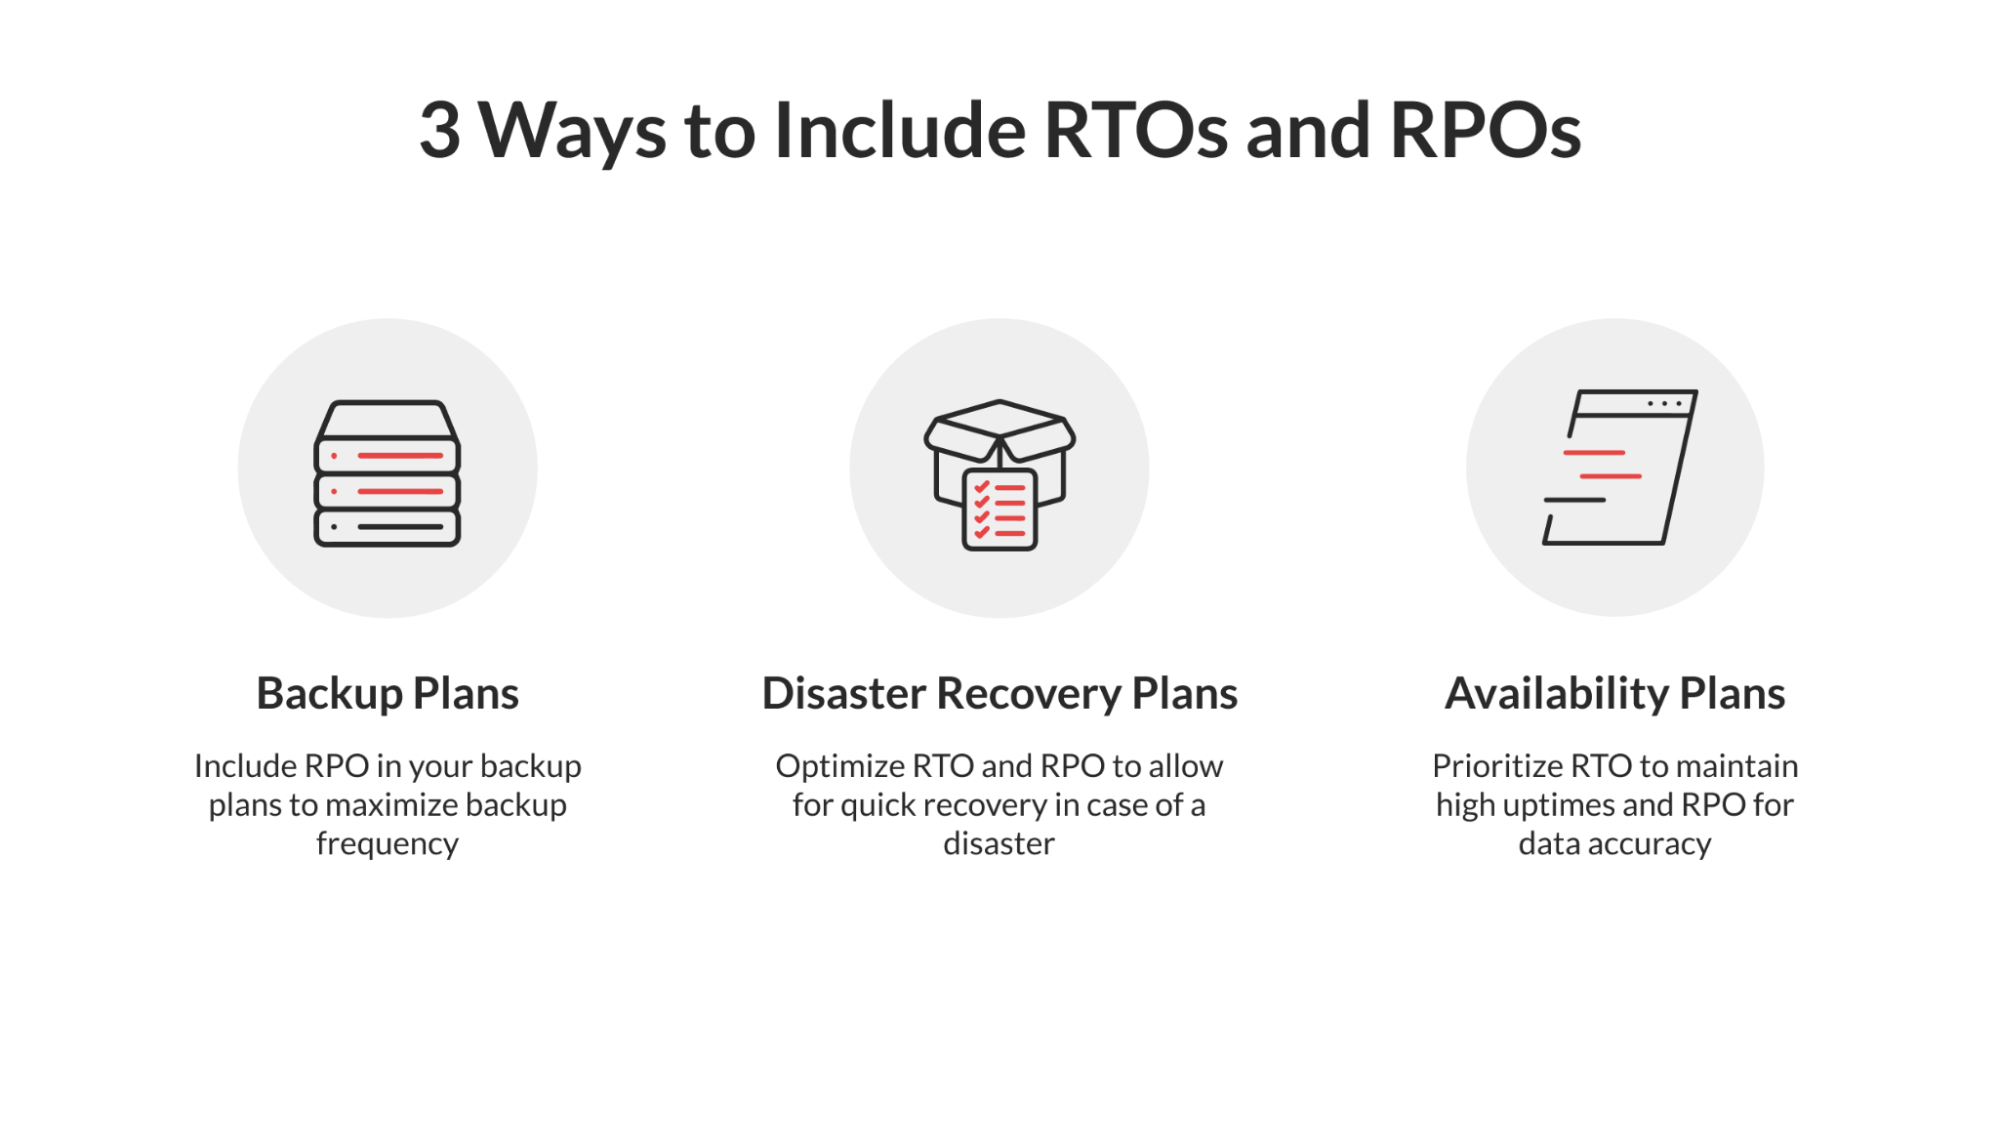 The role of RTO and RPO in data recovery and continuity planning